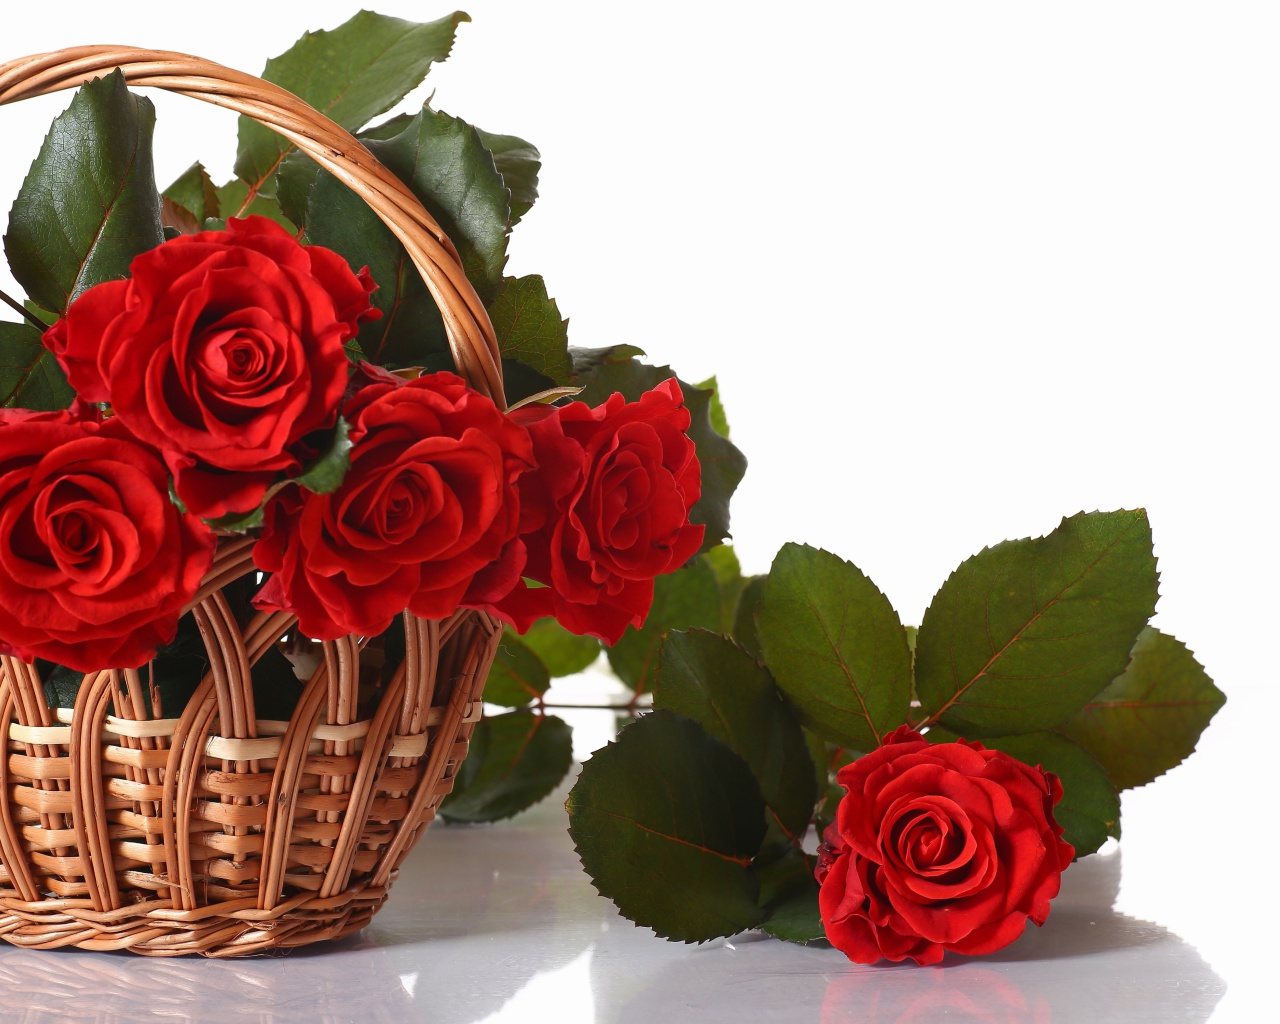 Das Basket with Roses Wallpaper 1280x1024